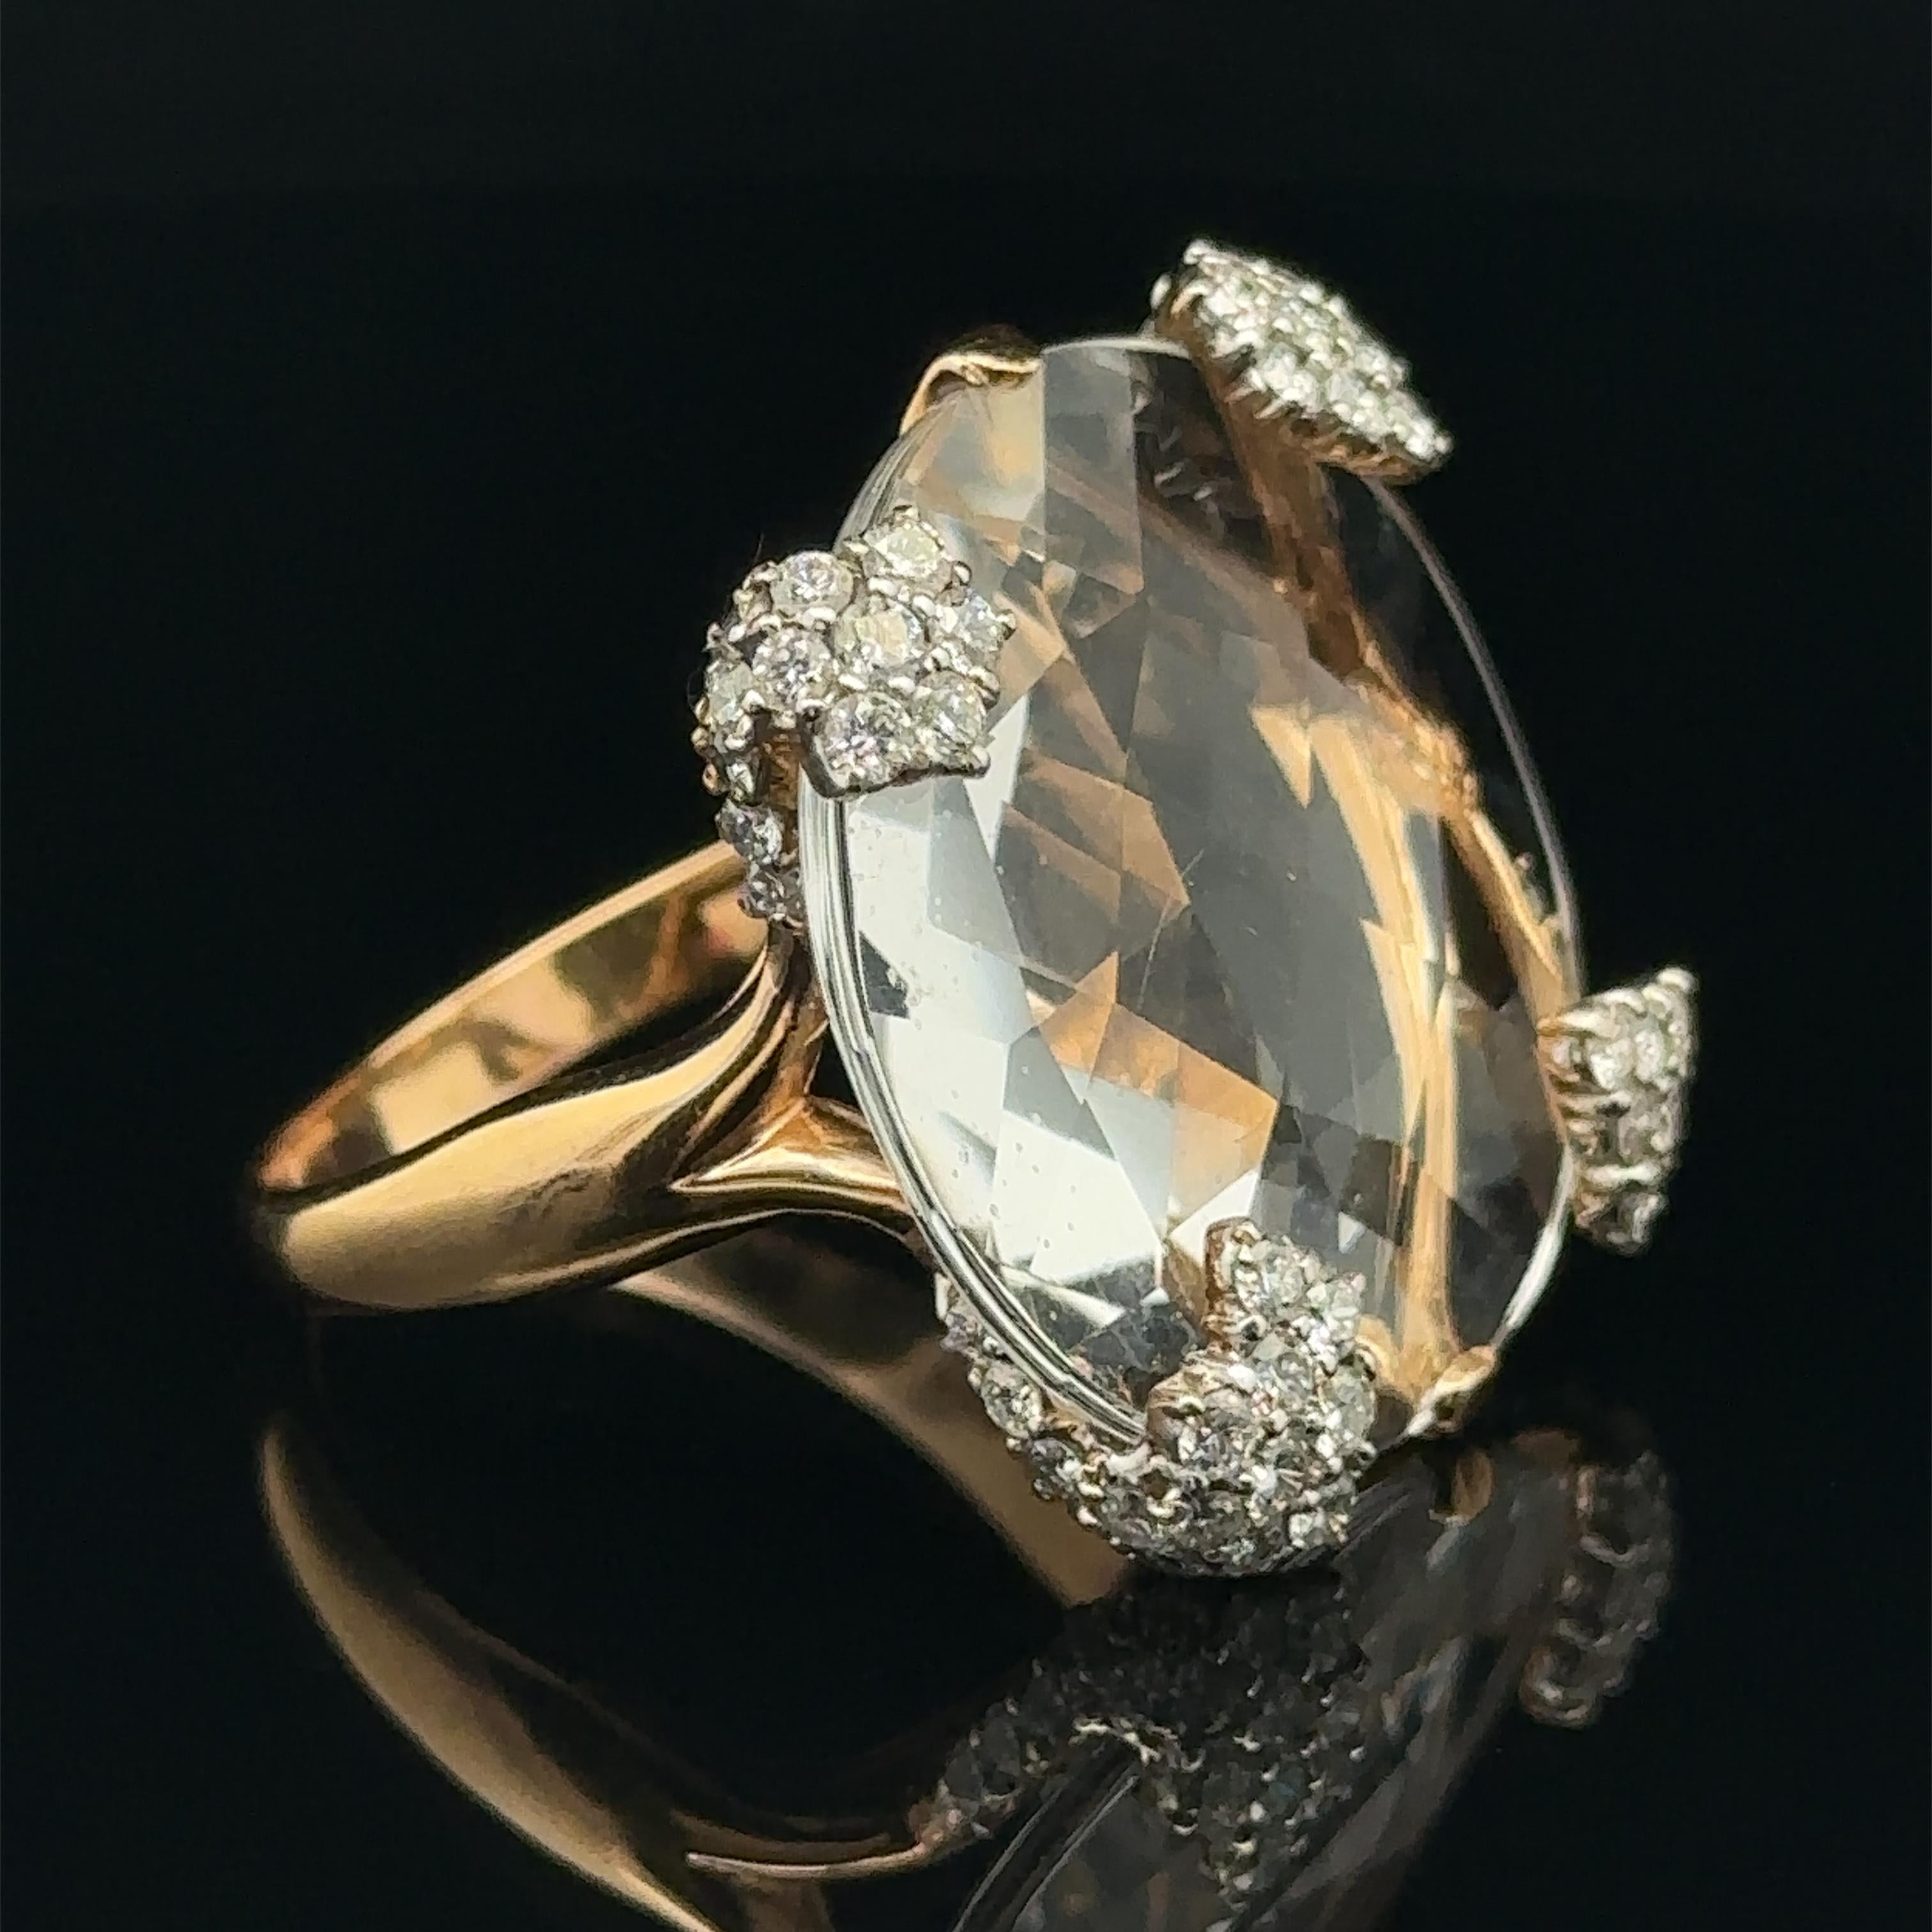 18k Yellow Gold Casato Diamond Prong & Large Faceted White Quartz Statement Ring For Sale 5